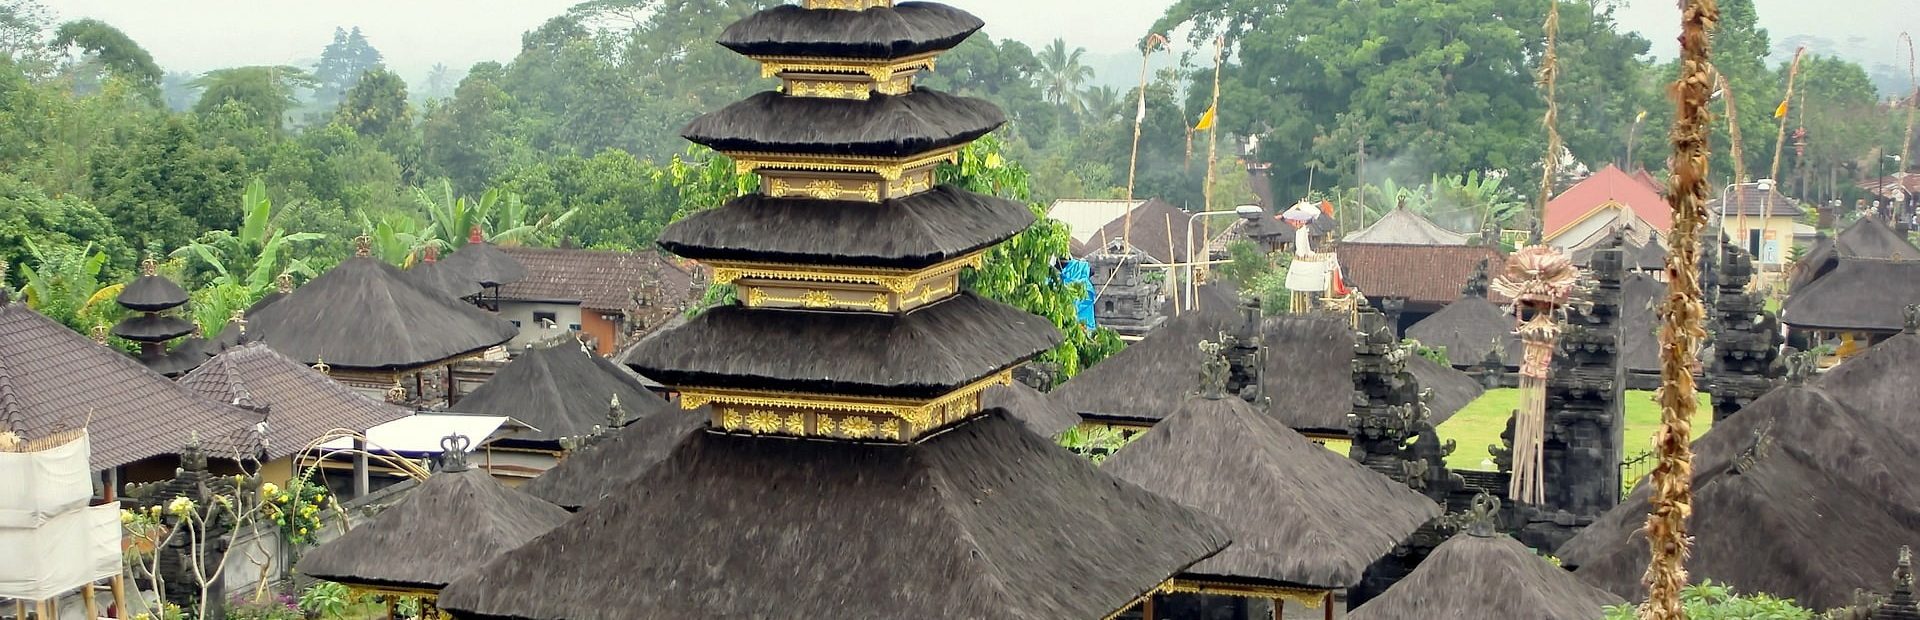 Besakih-Temple-Glimpses-of-the-World